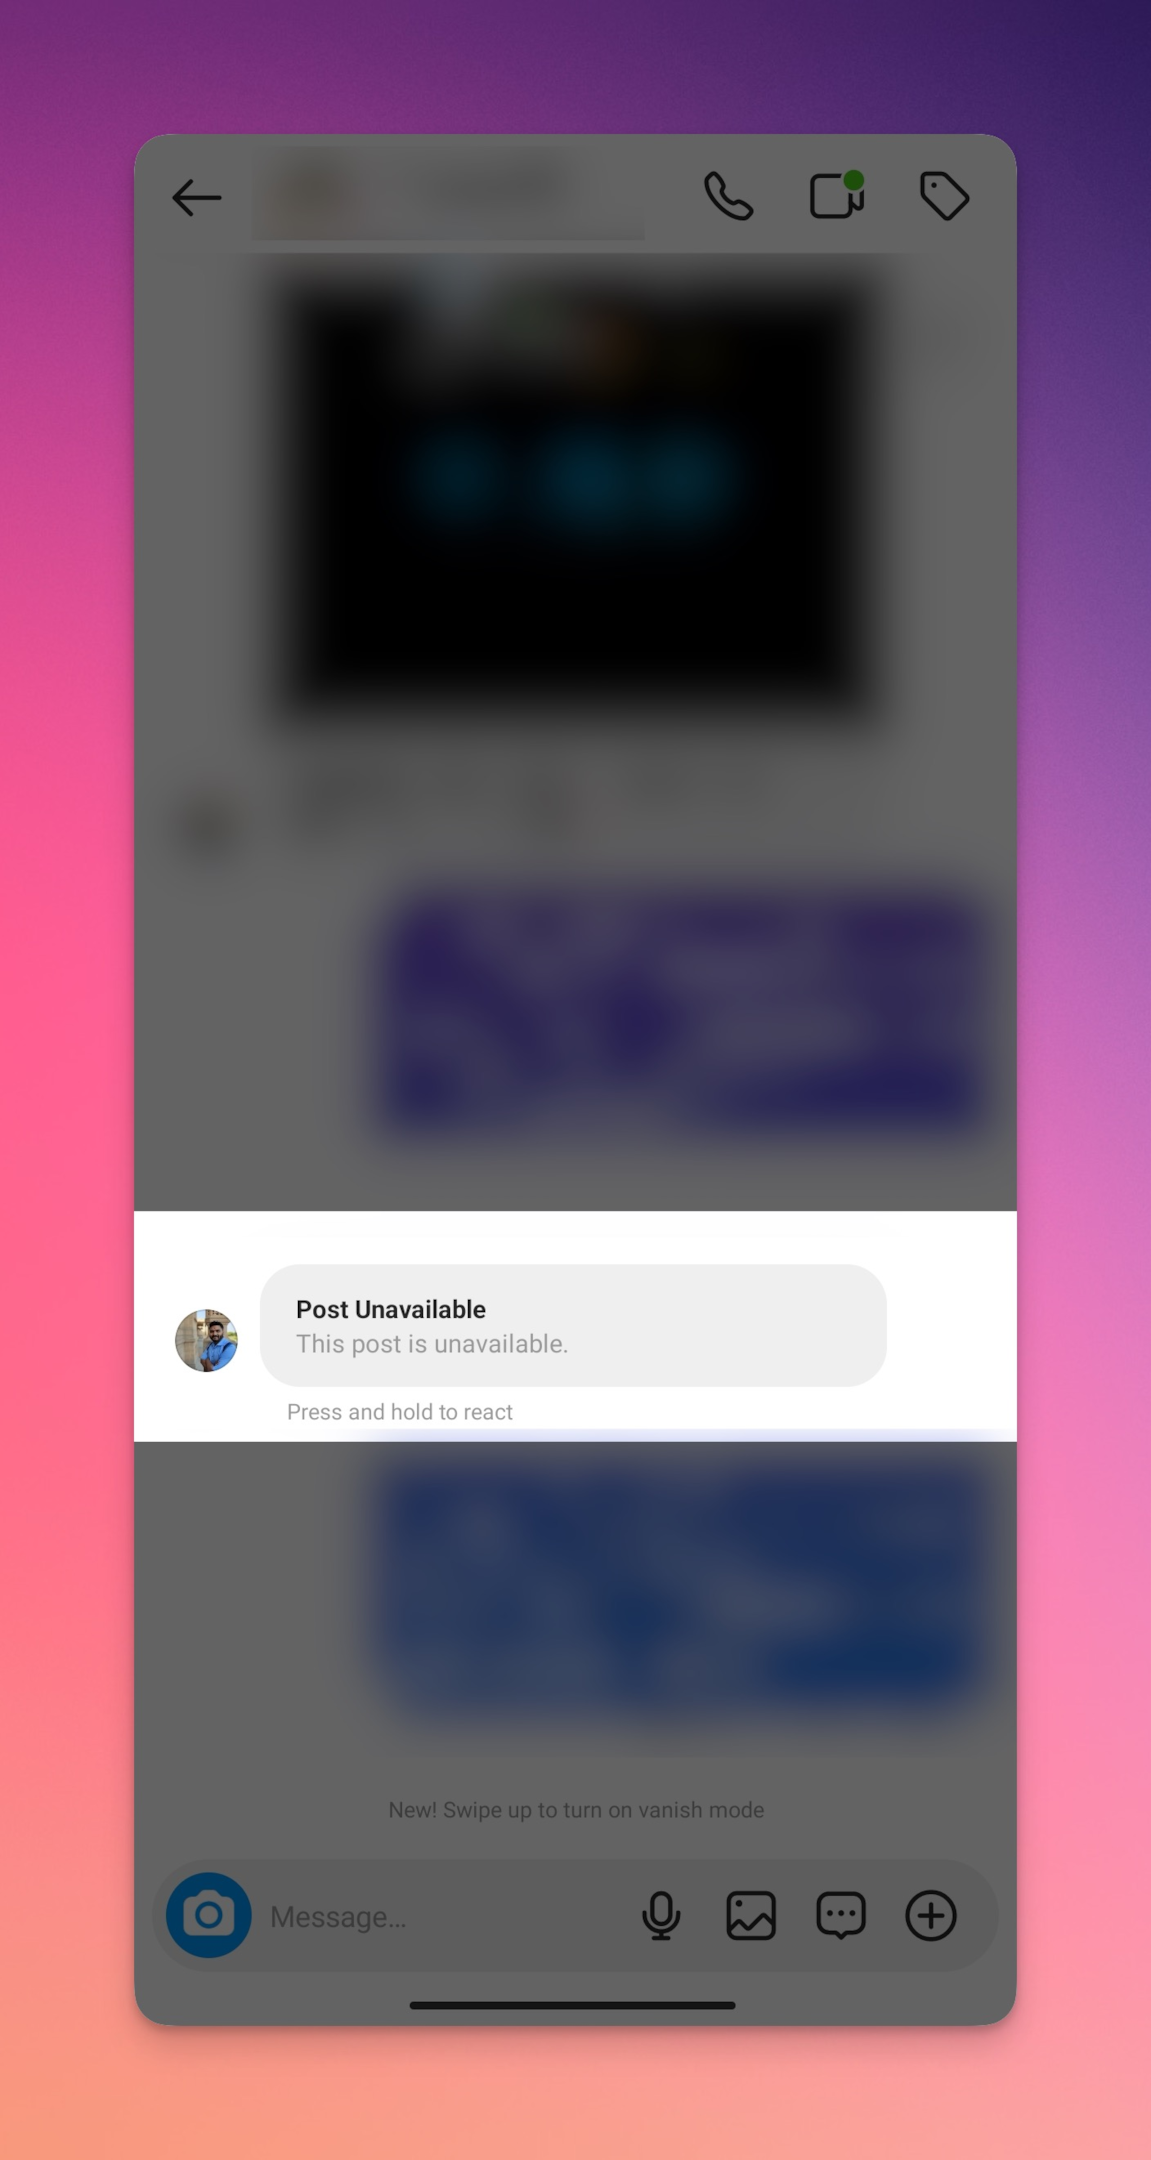 Remote.tools shows a screenshot of post unavailable message on Instagram